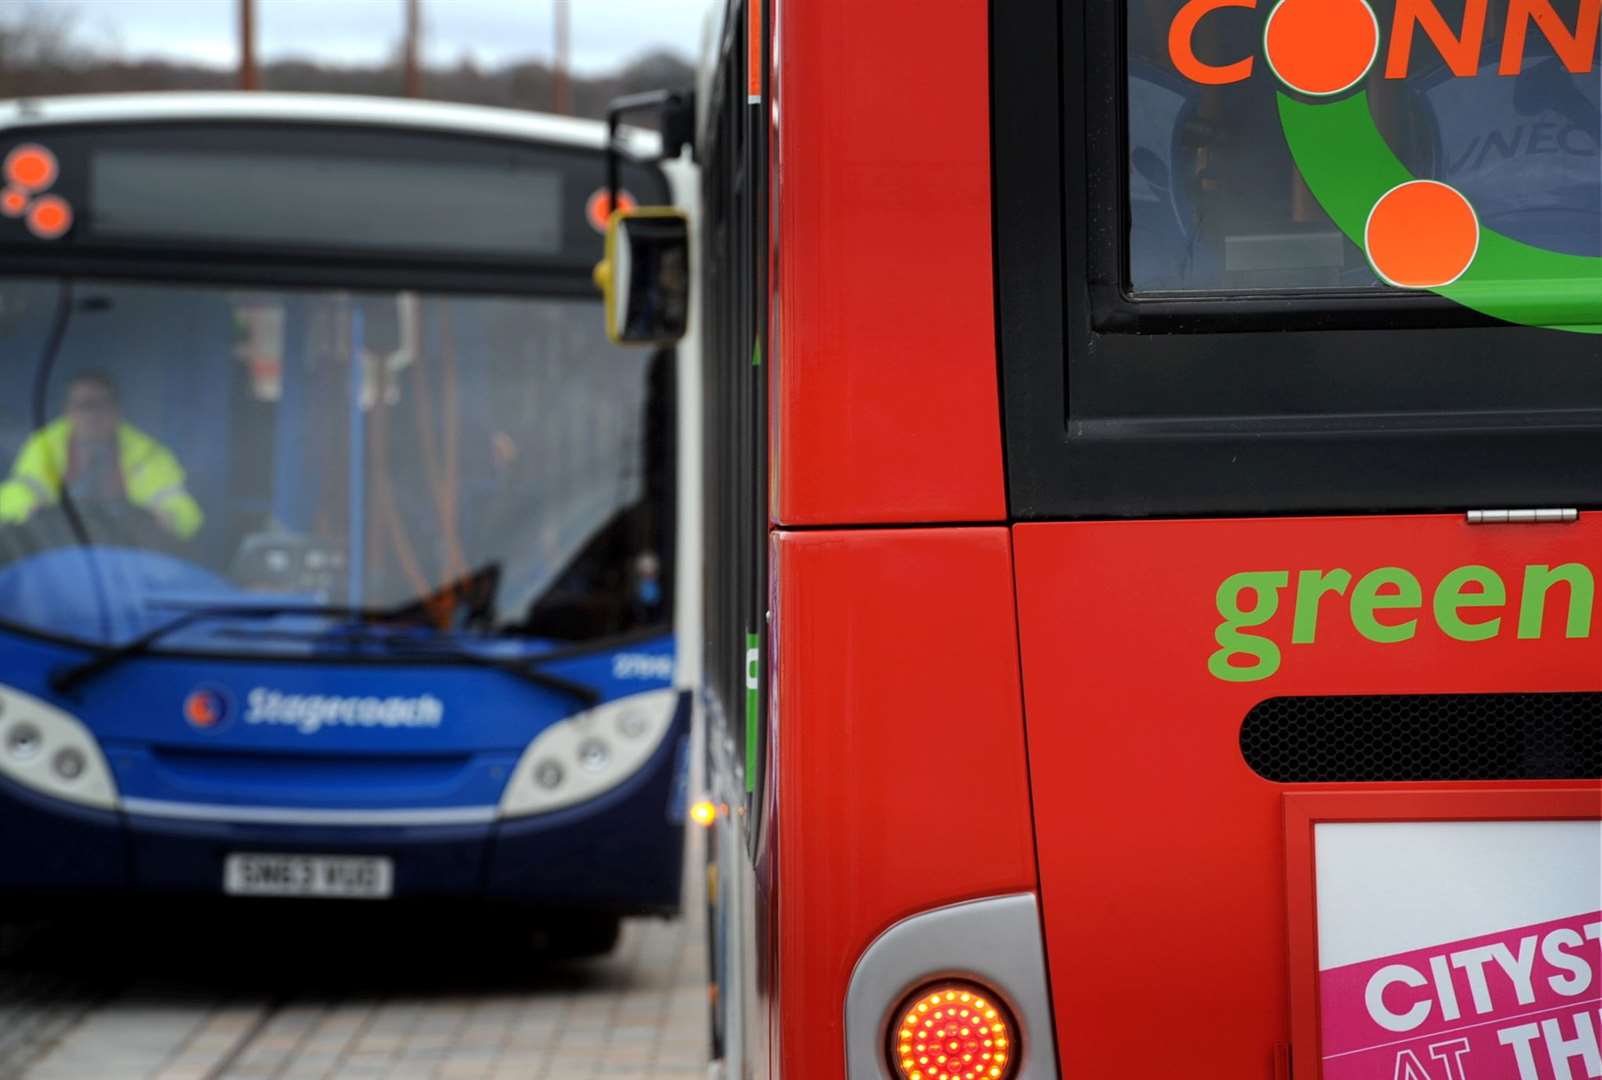 Stagecoach buses in Inverness are experiencing daily disruption. Picture: Gary Anthony.